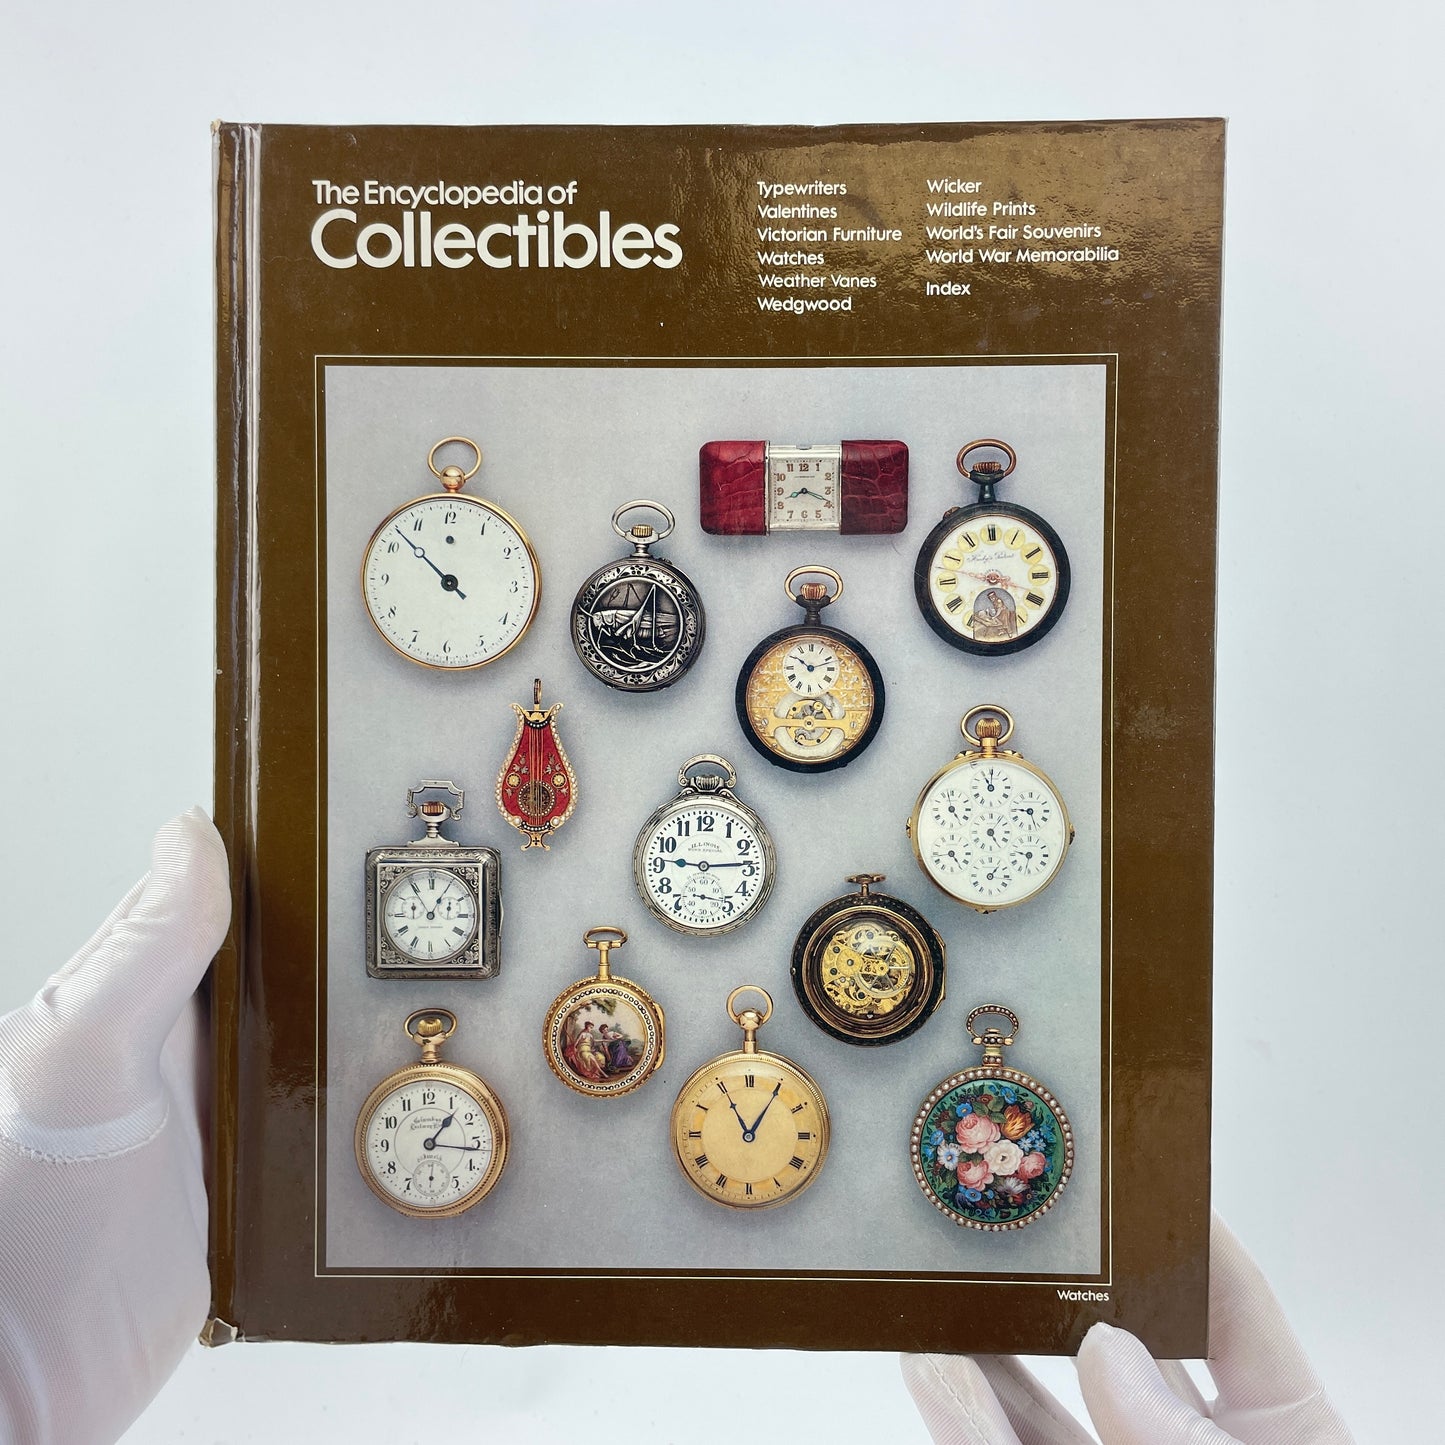 Feb Lot 137- The Encyclopedia of Collectibles